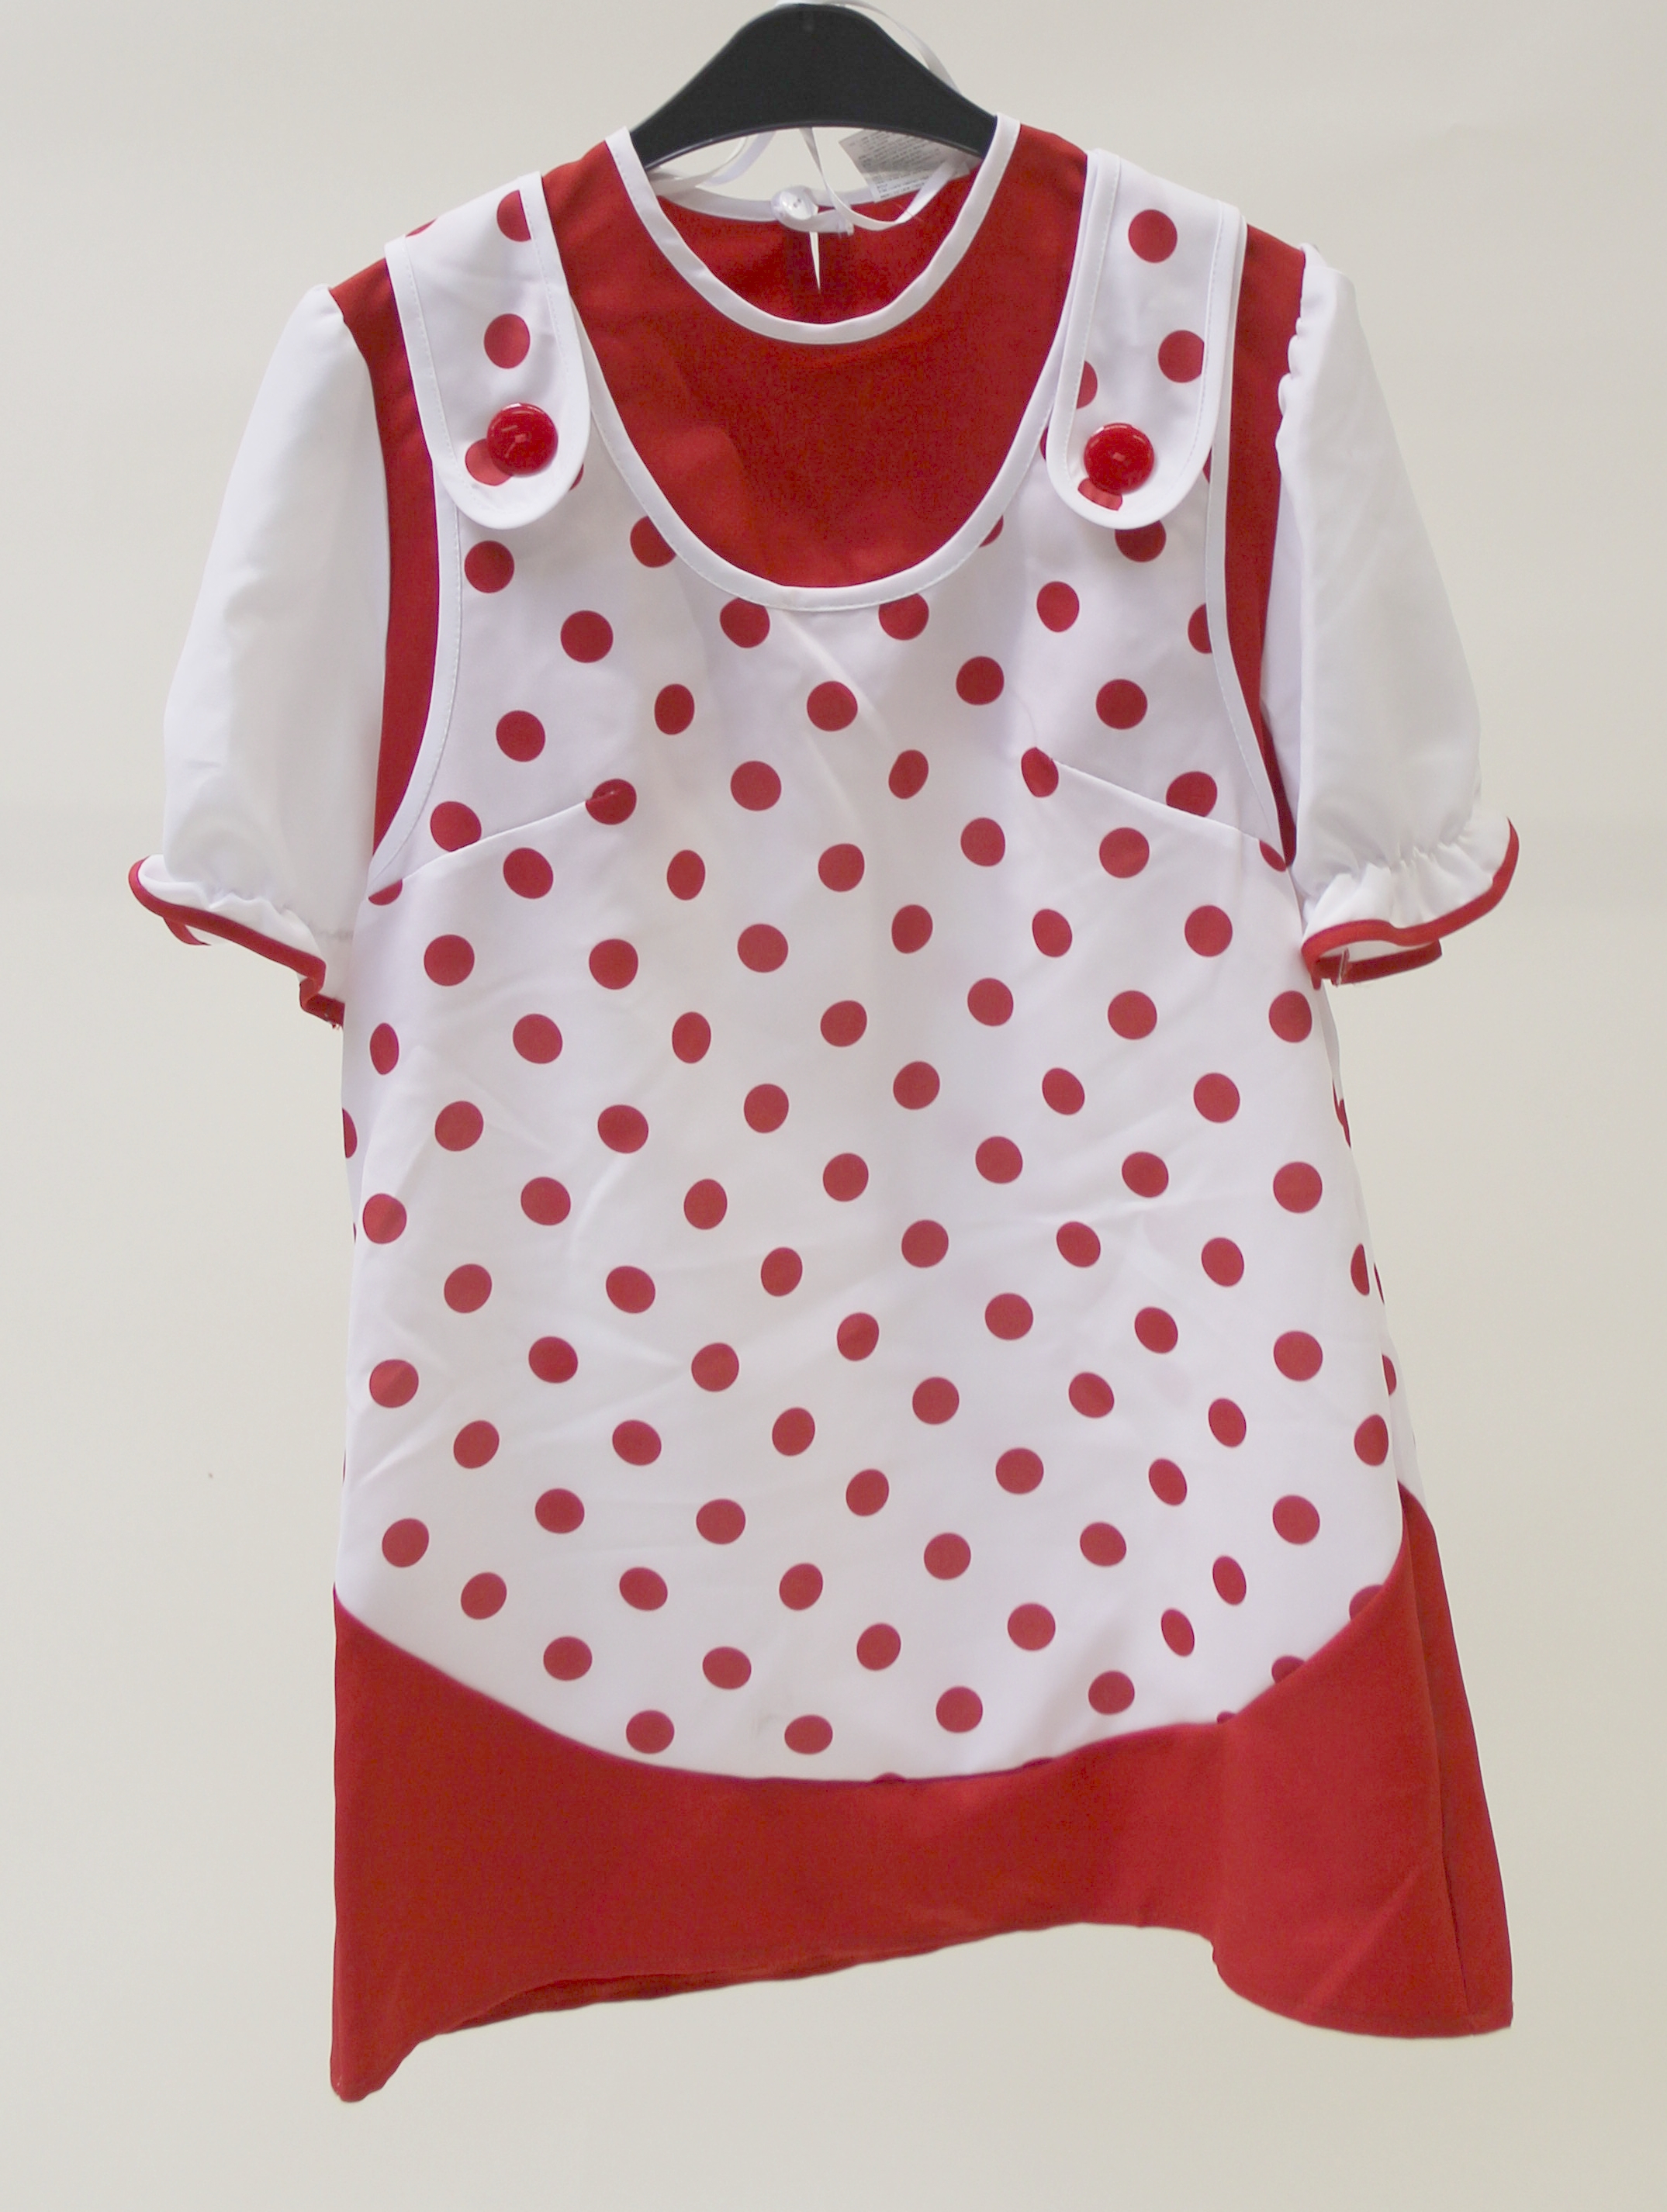 Special item package clown red - white